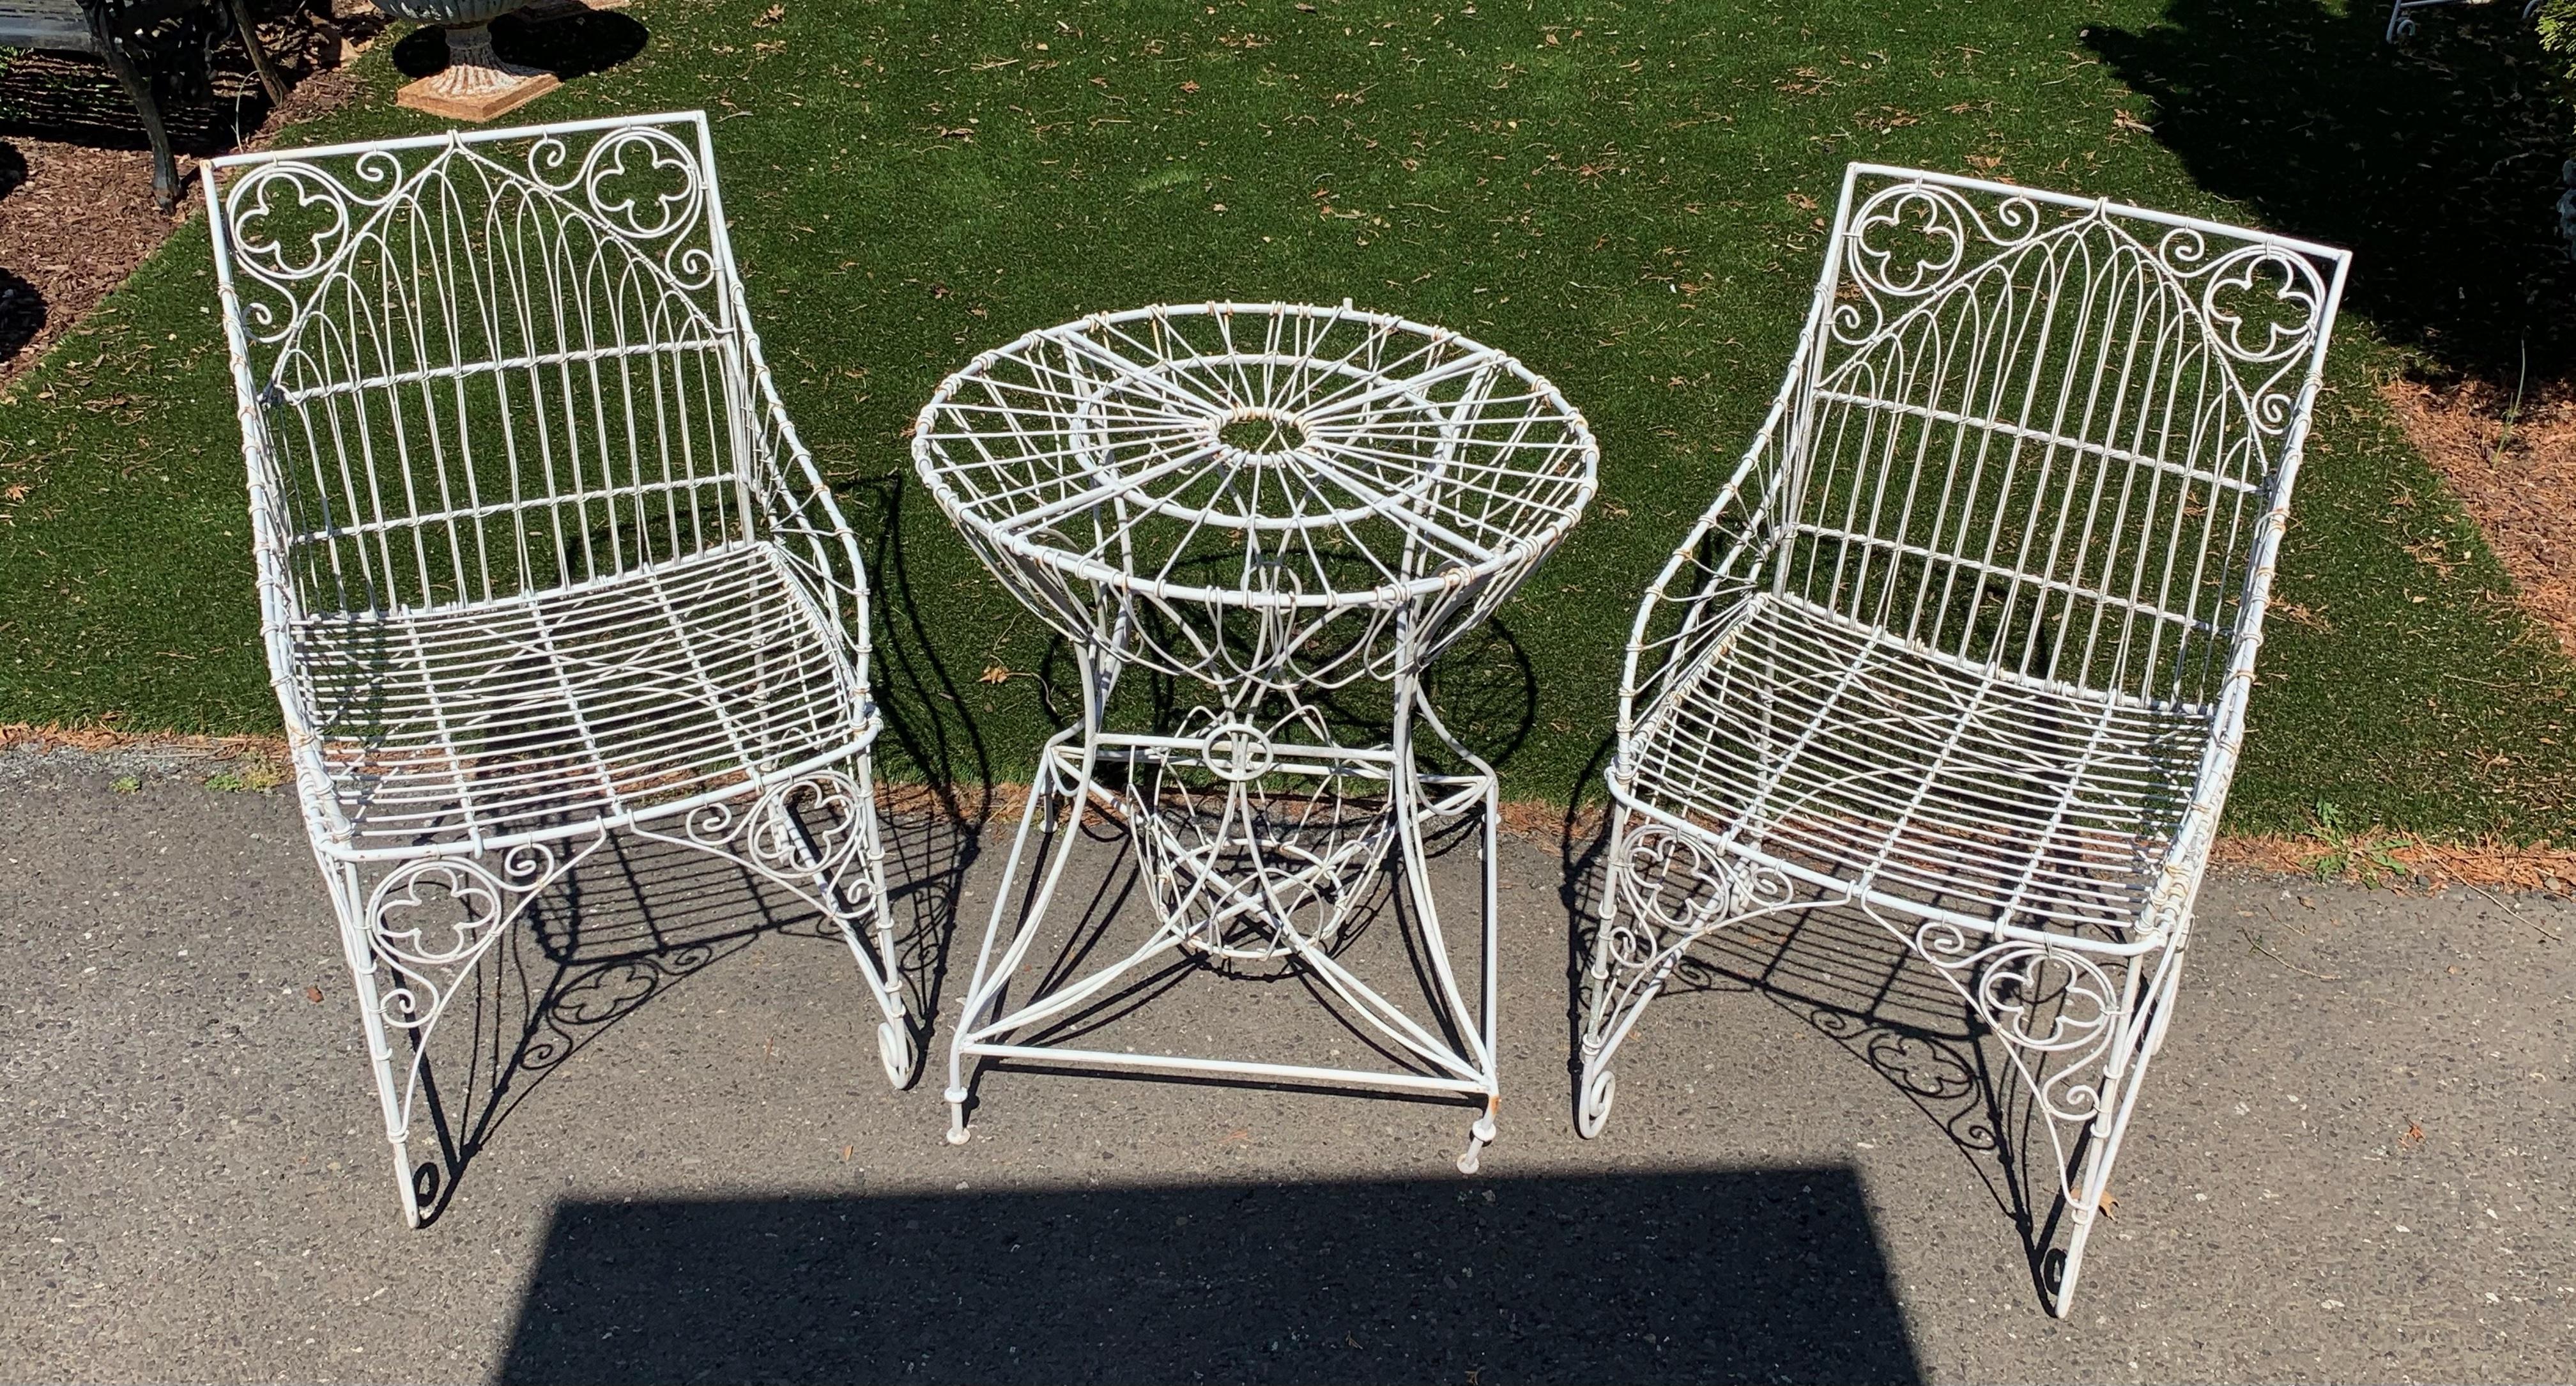 Functional and beautiful bistro set including two vintage white iron arm chairs and matching round side table, perfect for the patio or garden.
Table is 25